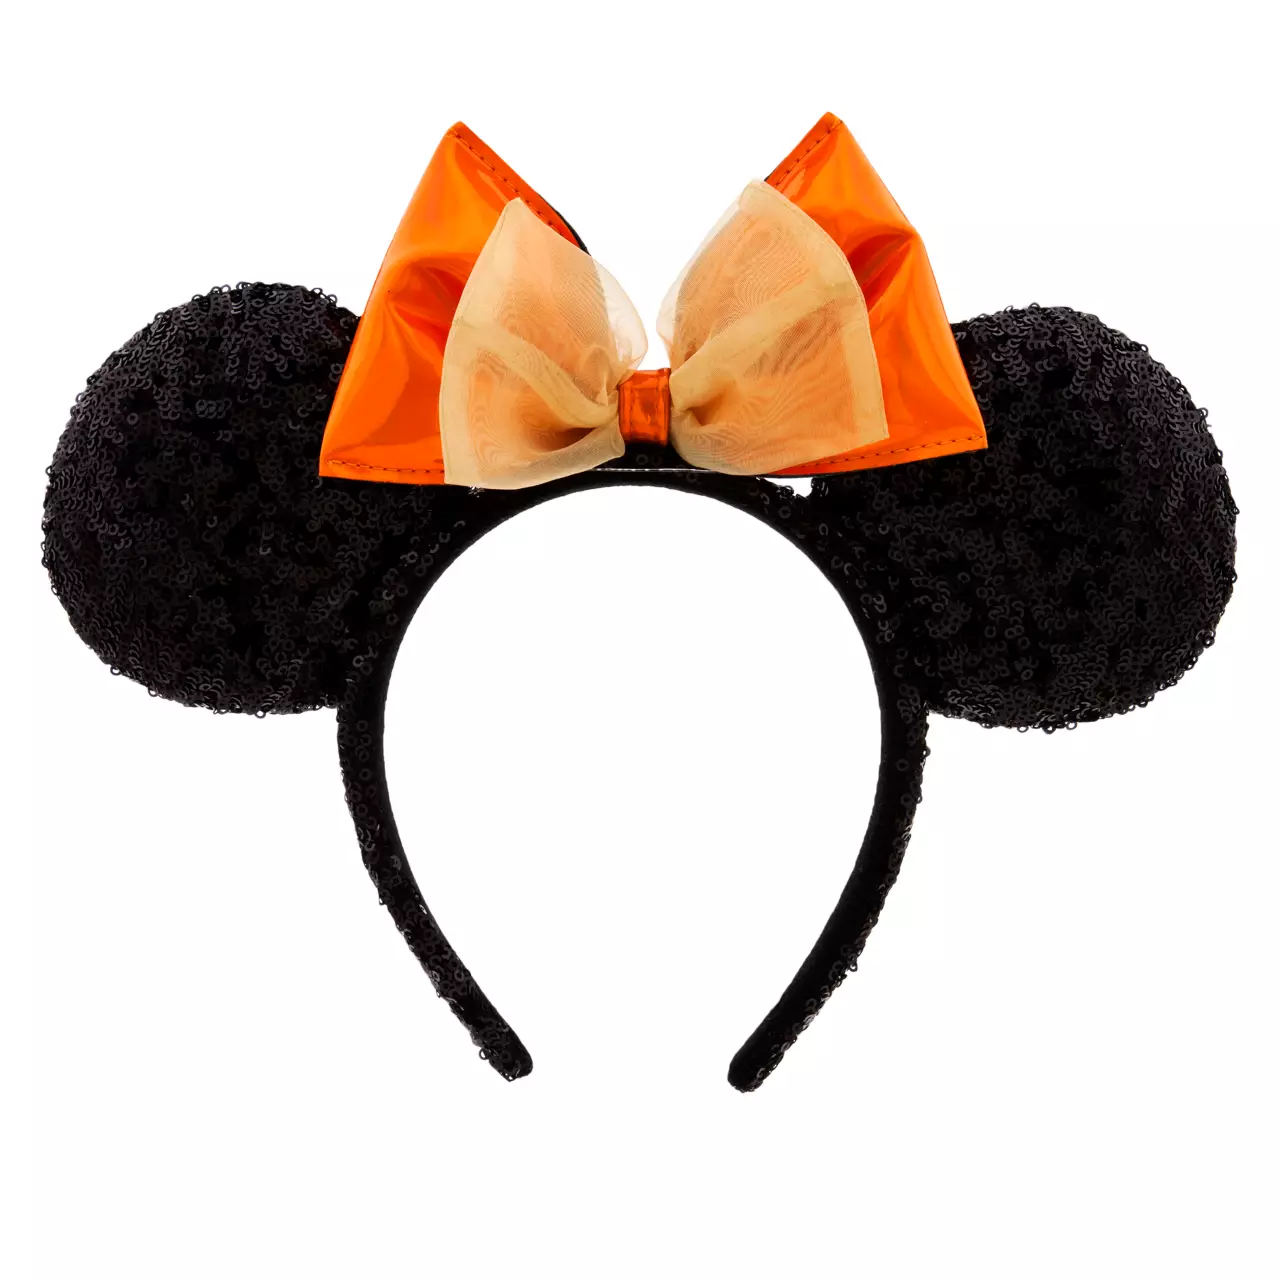 Minnie Mouse Ears With Orange Bow